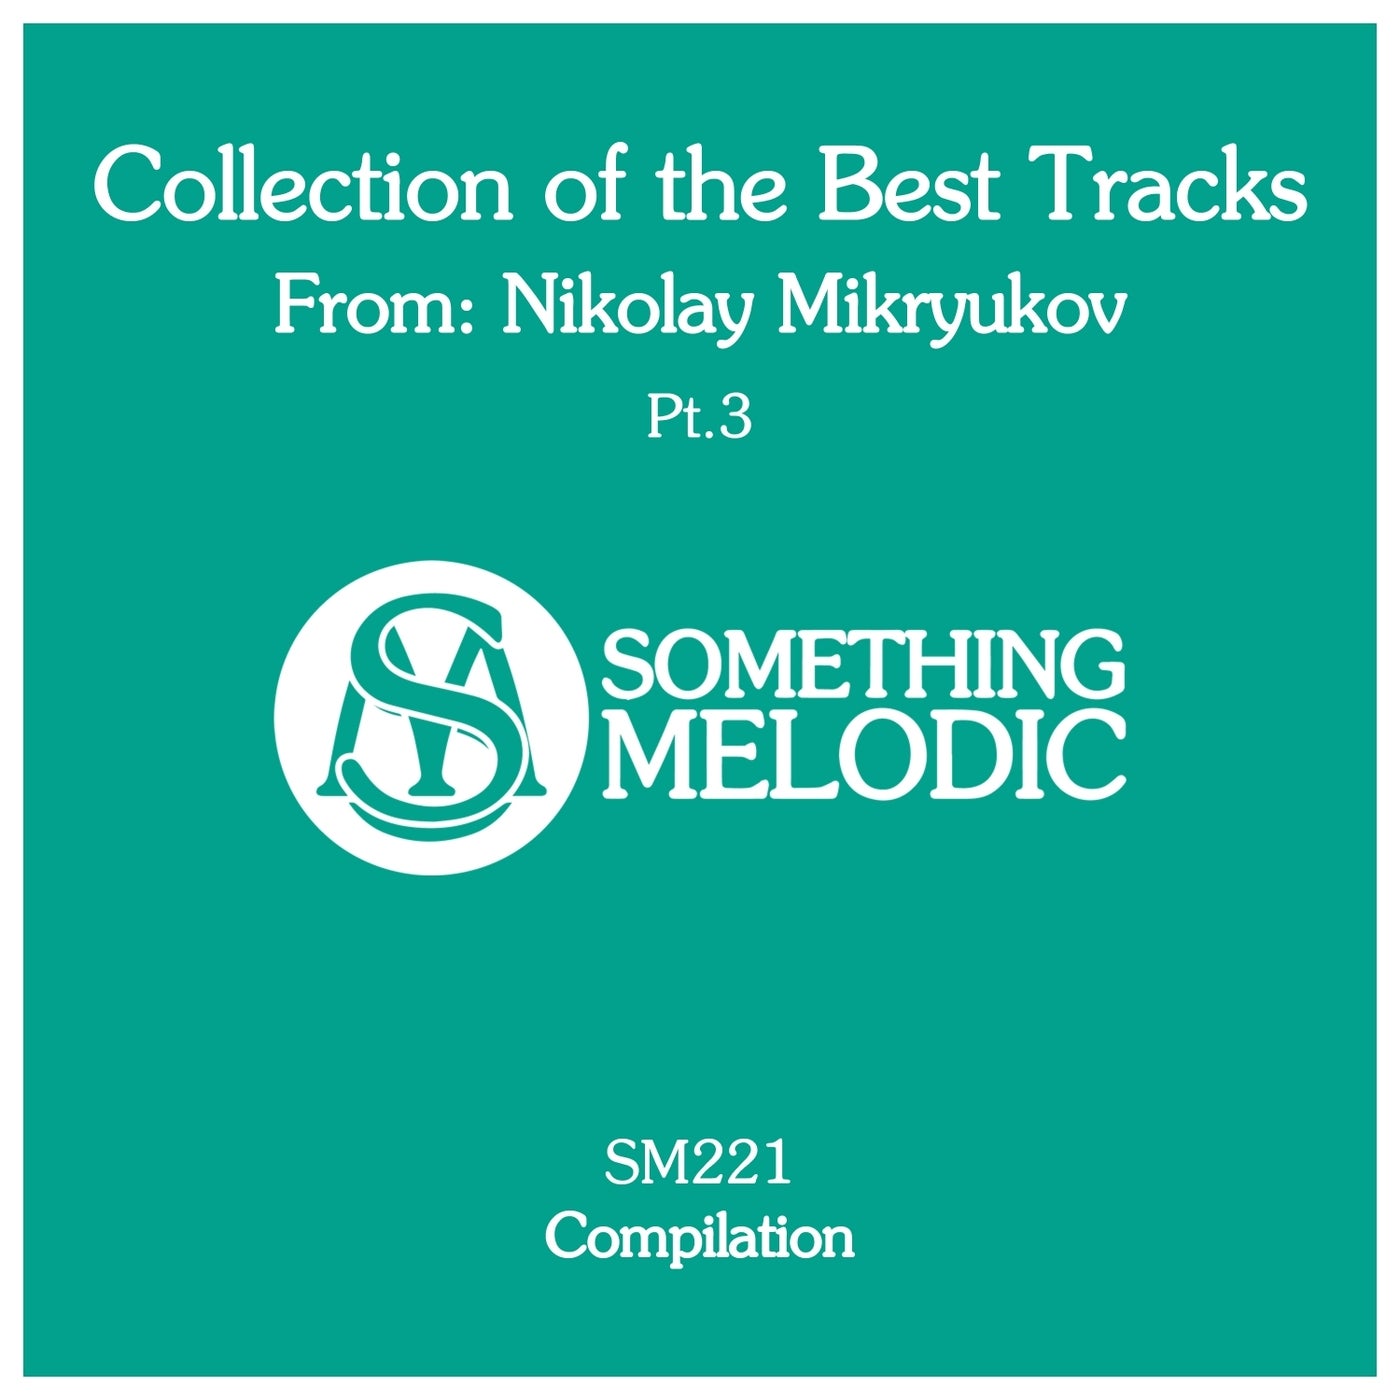 Collection of the Best Tracks From: Nikolay Mikryukov, Pt. 3